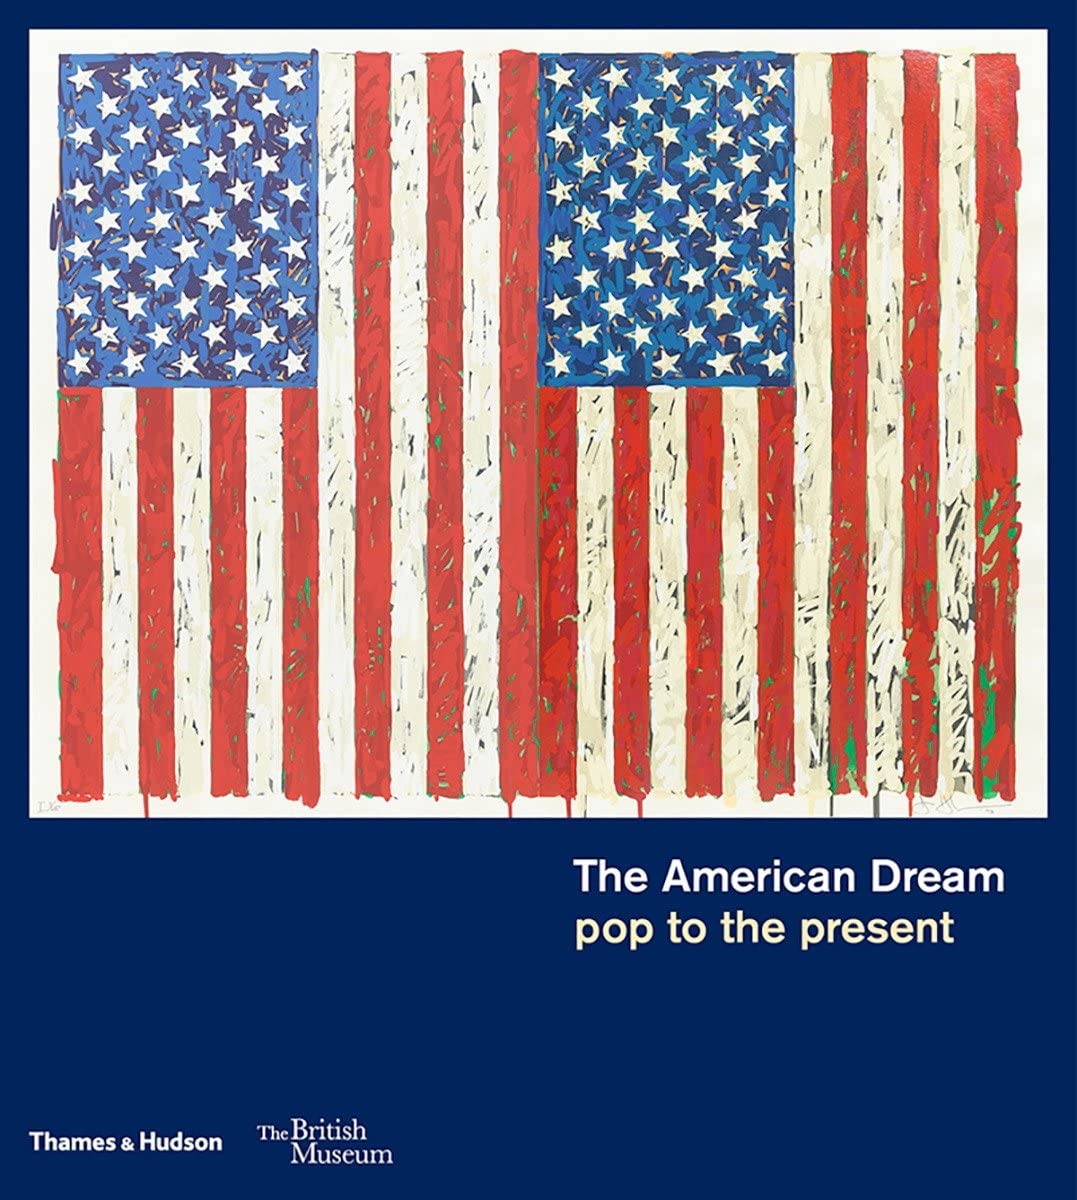 The American Dream: pop to the present